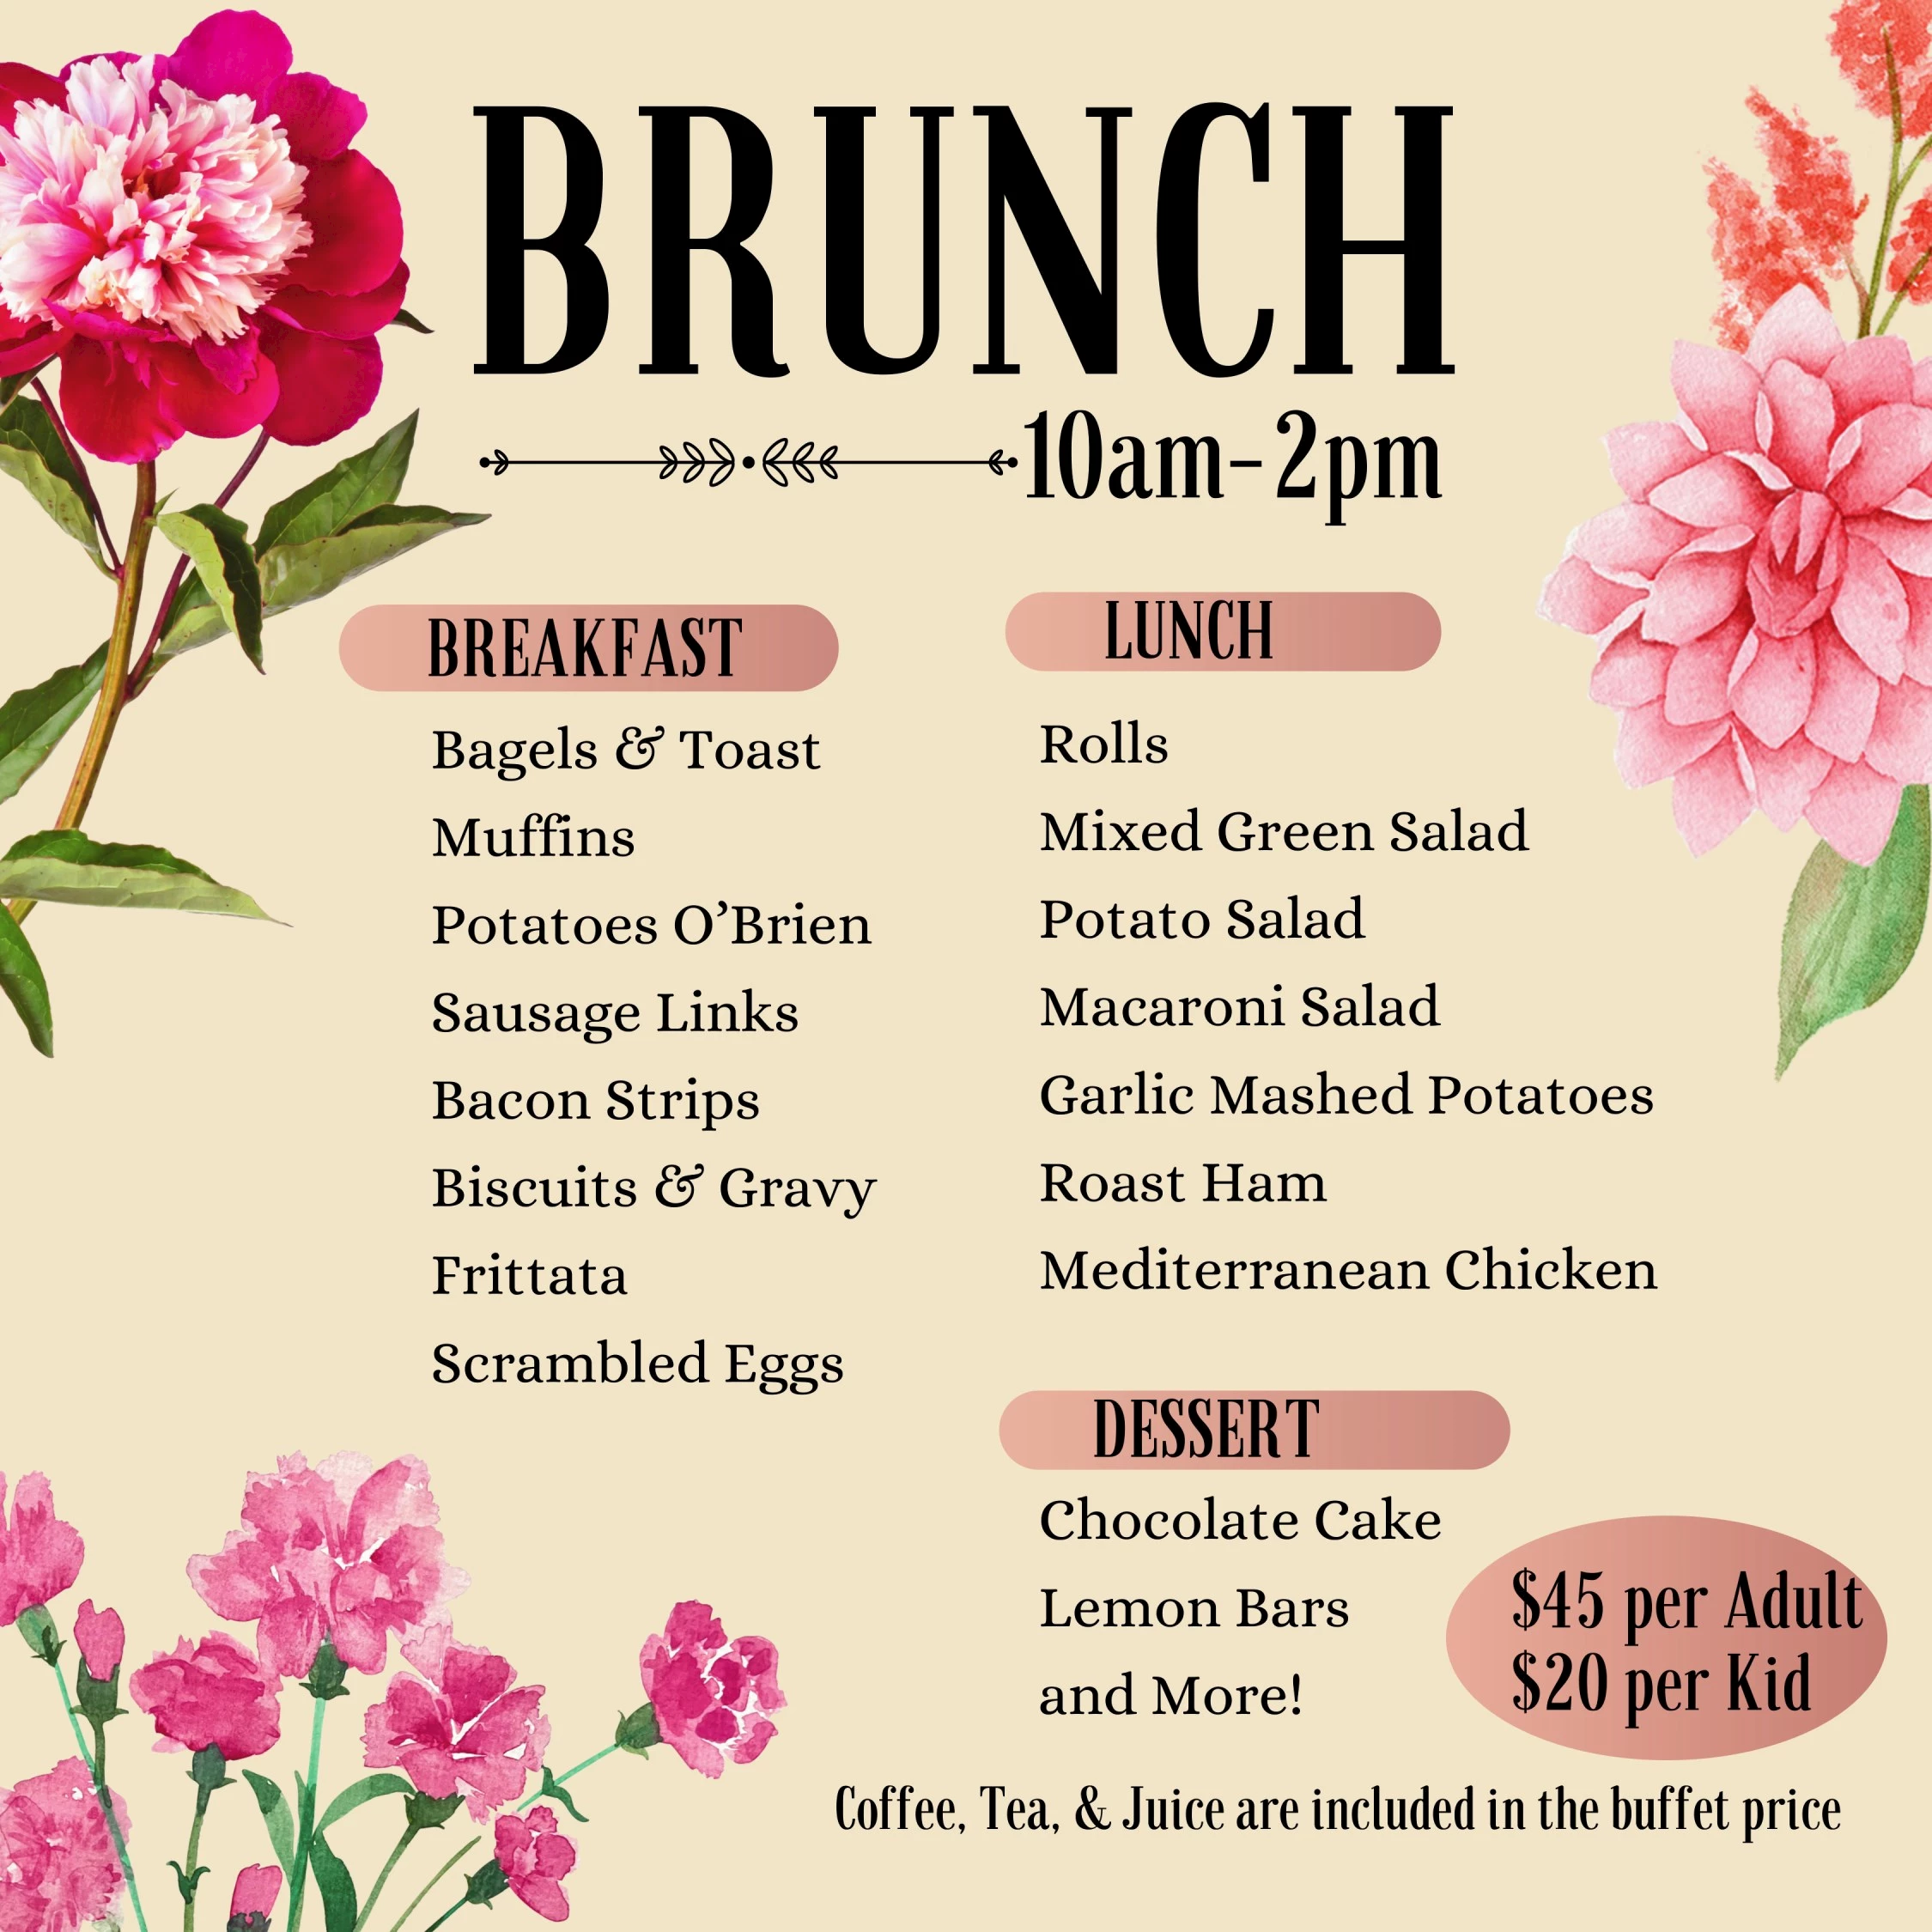 A brunch menu listing breakfast, lunch, and dessert items, with service from 10am-2pm, priced at $45 per adult and $20 per kid.